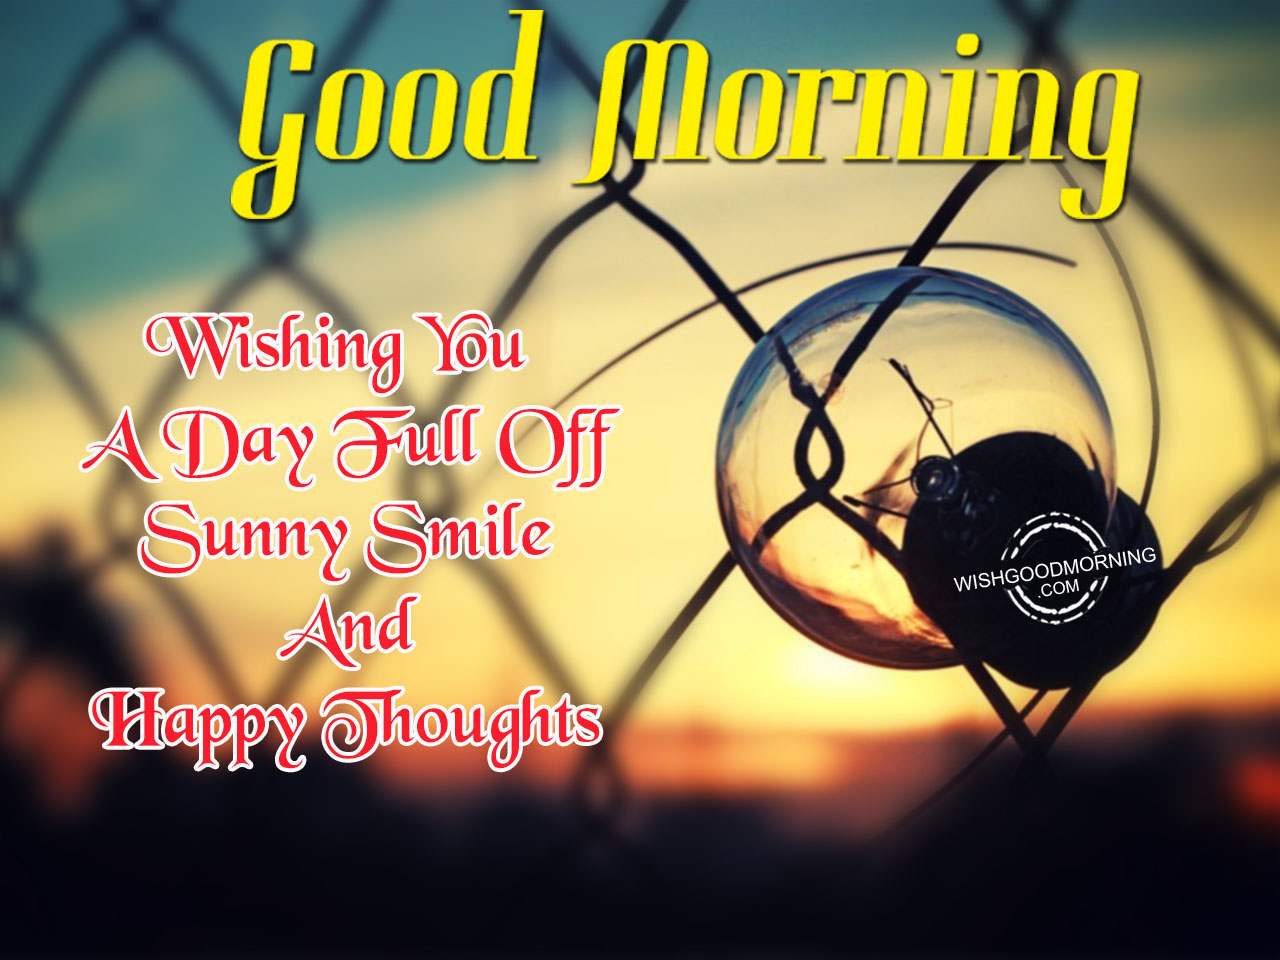 Wishing You A Day Full Off Sunny Smile – Good Morning - Good ...